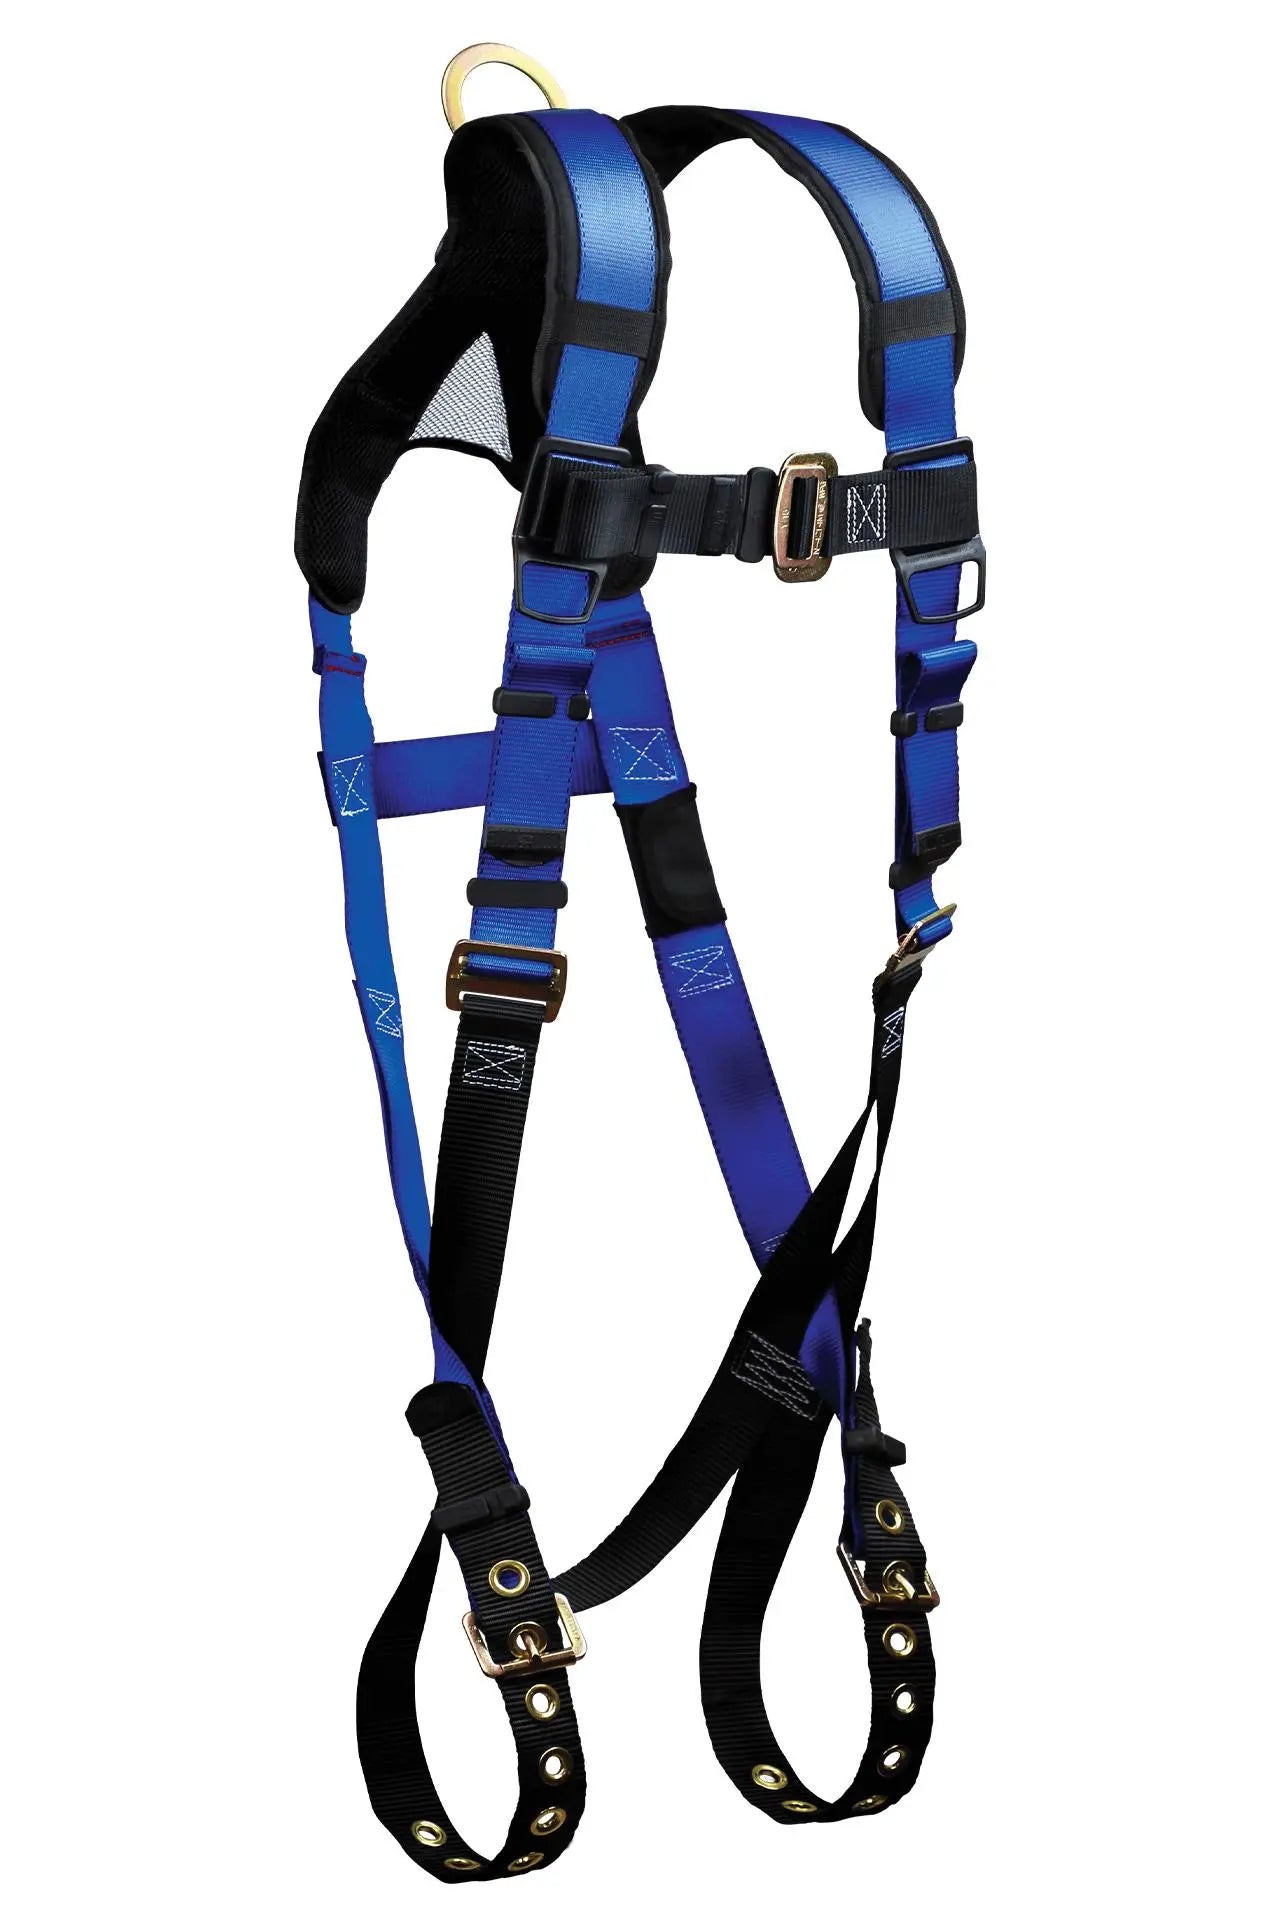 FALLTECH - Contractor+ 1D Standard Non-belted Full Body Harness - Becker Safety and Supply